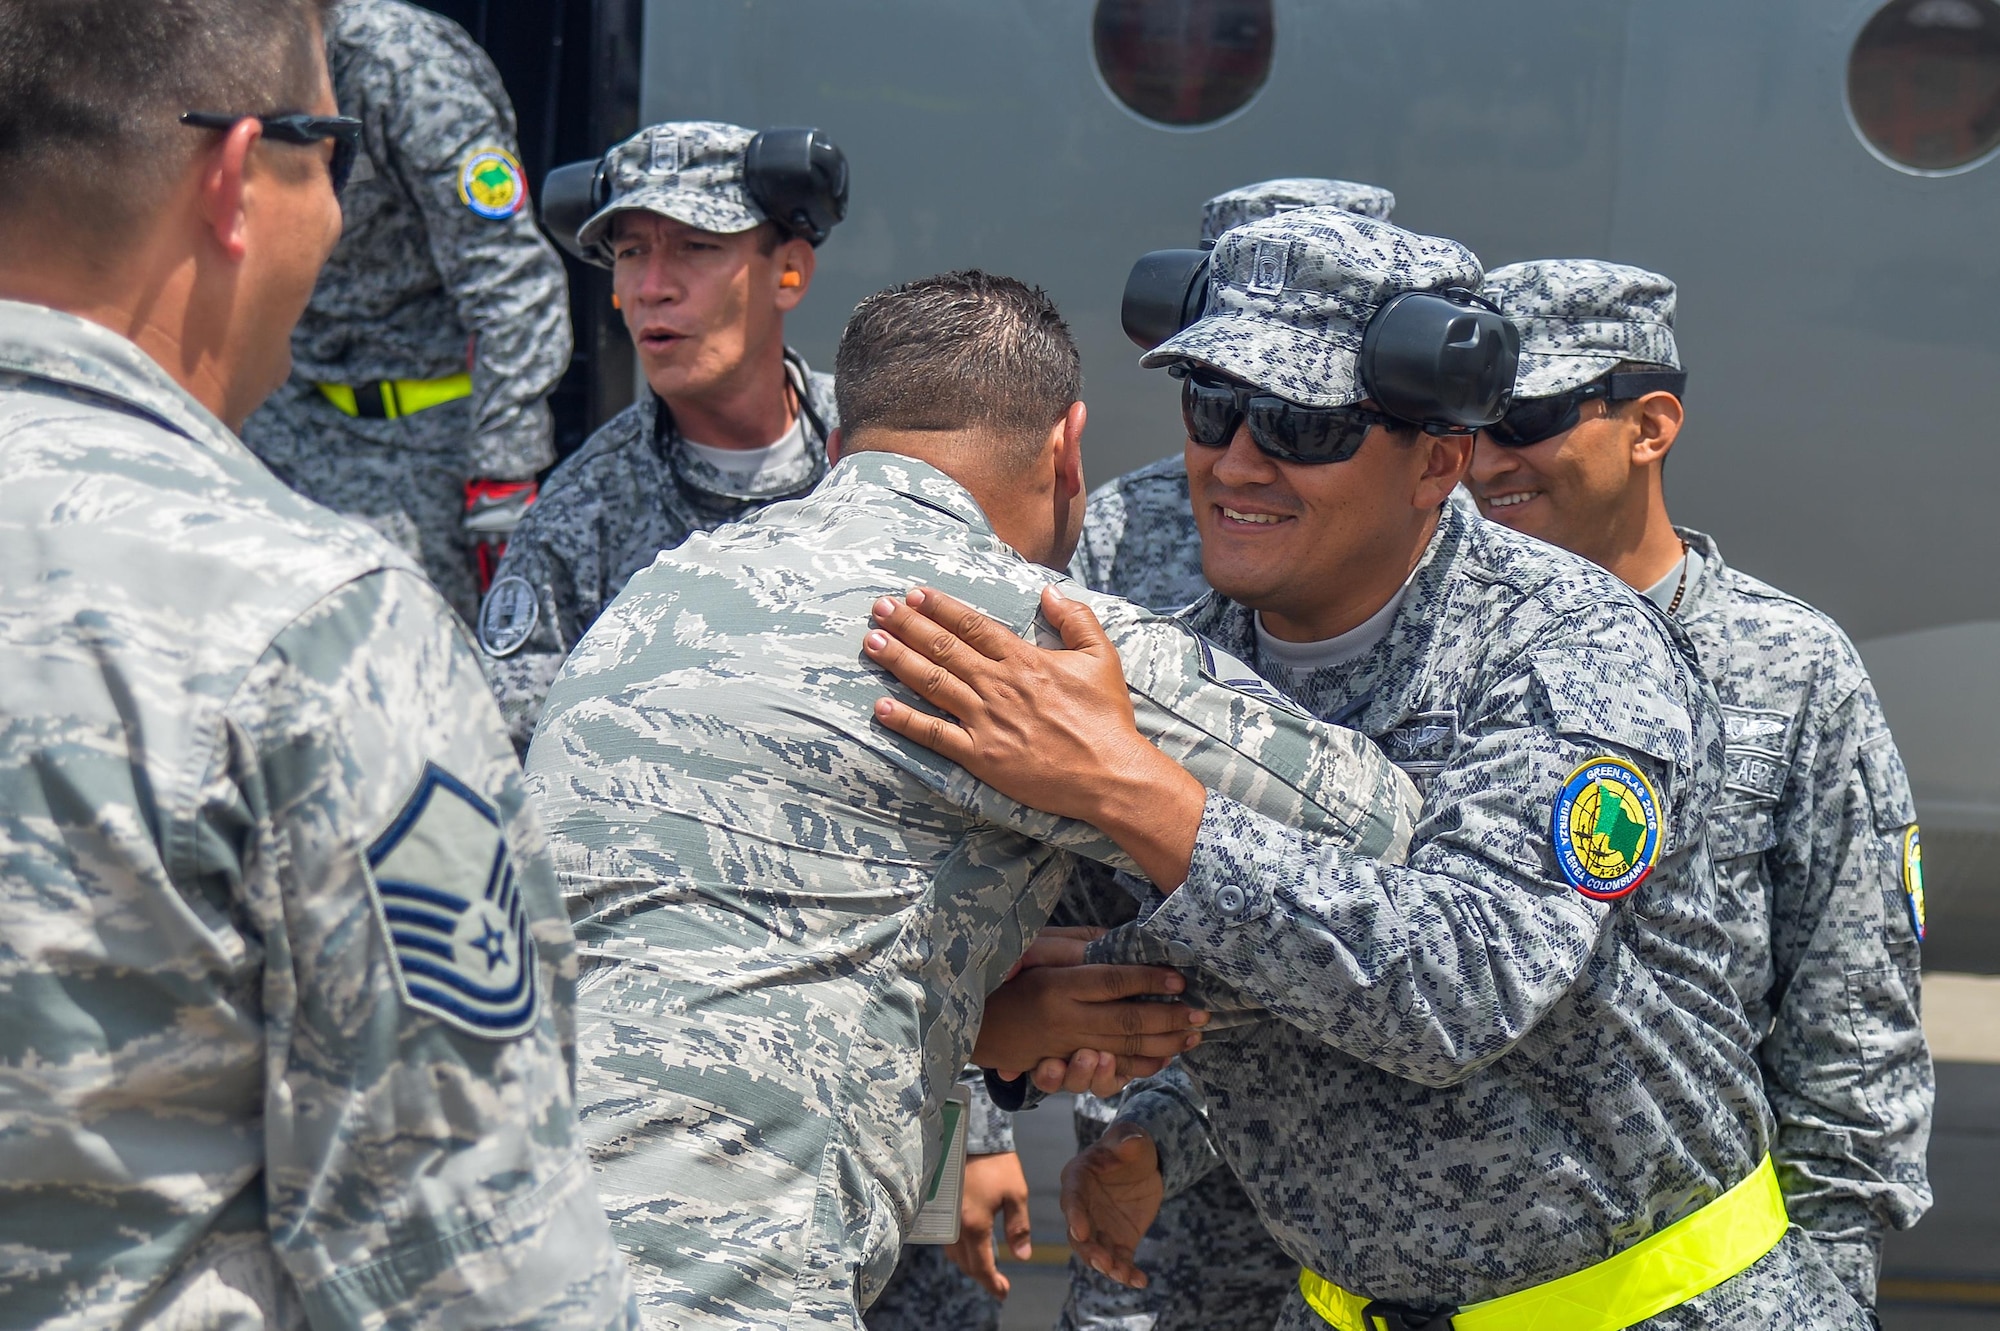 Colombian and U.S. Air Force Airmen greet each other after the Colombians arrived to Barksdale Air Force Base, La., Aug. 13, 2016. The Colombian Airmen, along with four A-29B Super Tucano aircraft, are at Barksdale to participate in Exercise Green Flag East Aug. 15-29. (U.S. Air Force photo/Senior Airman Mozer O. Da Cunha)